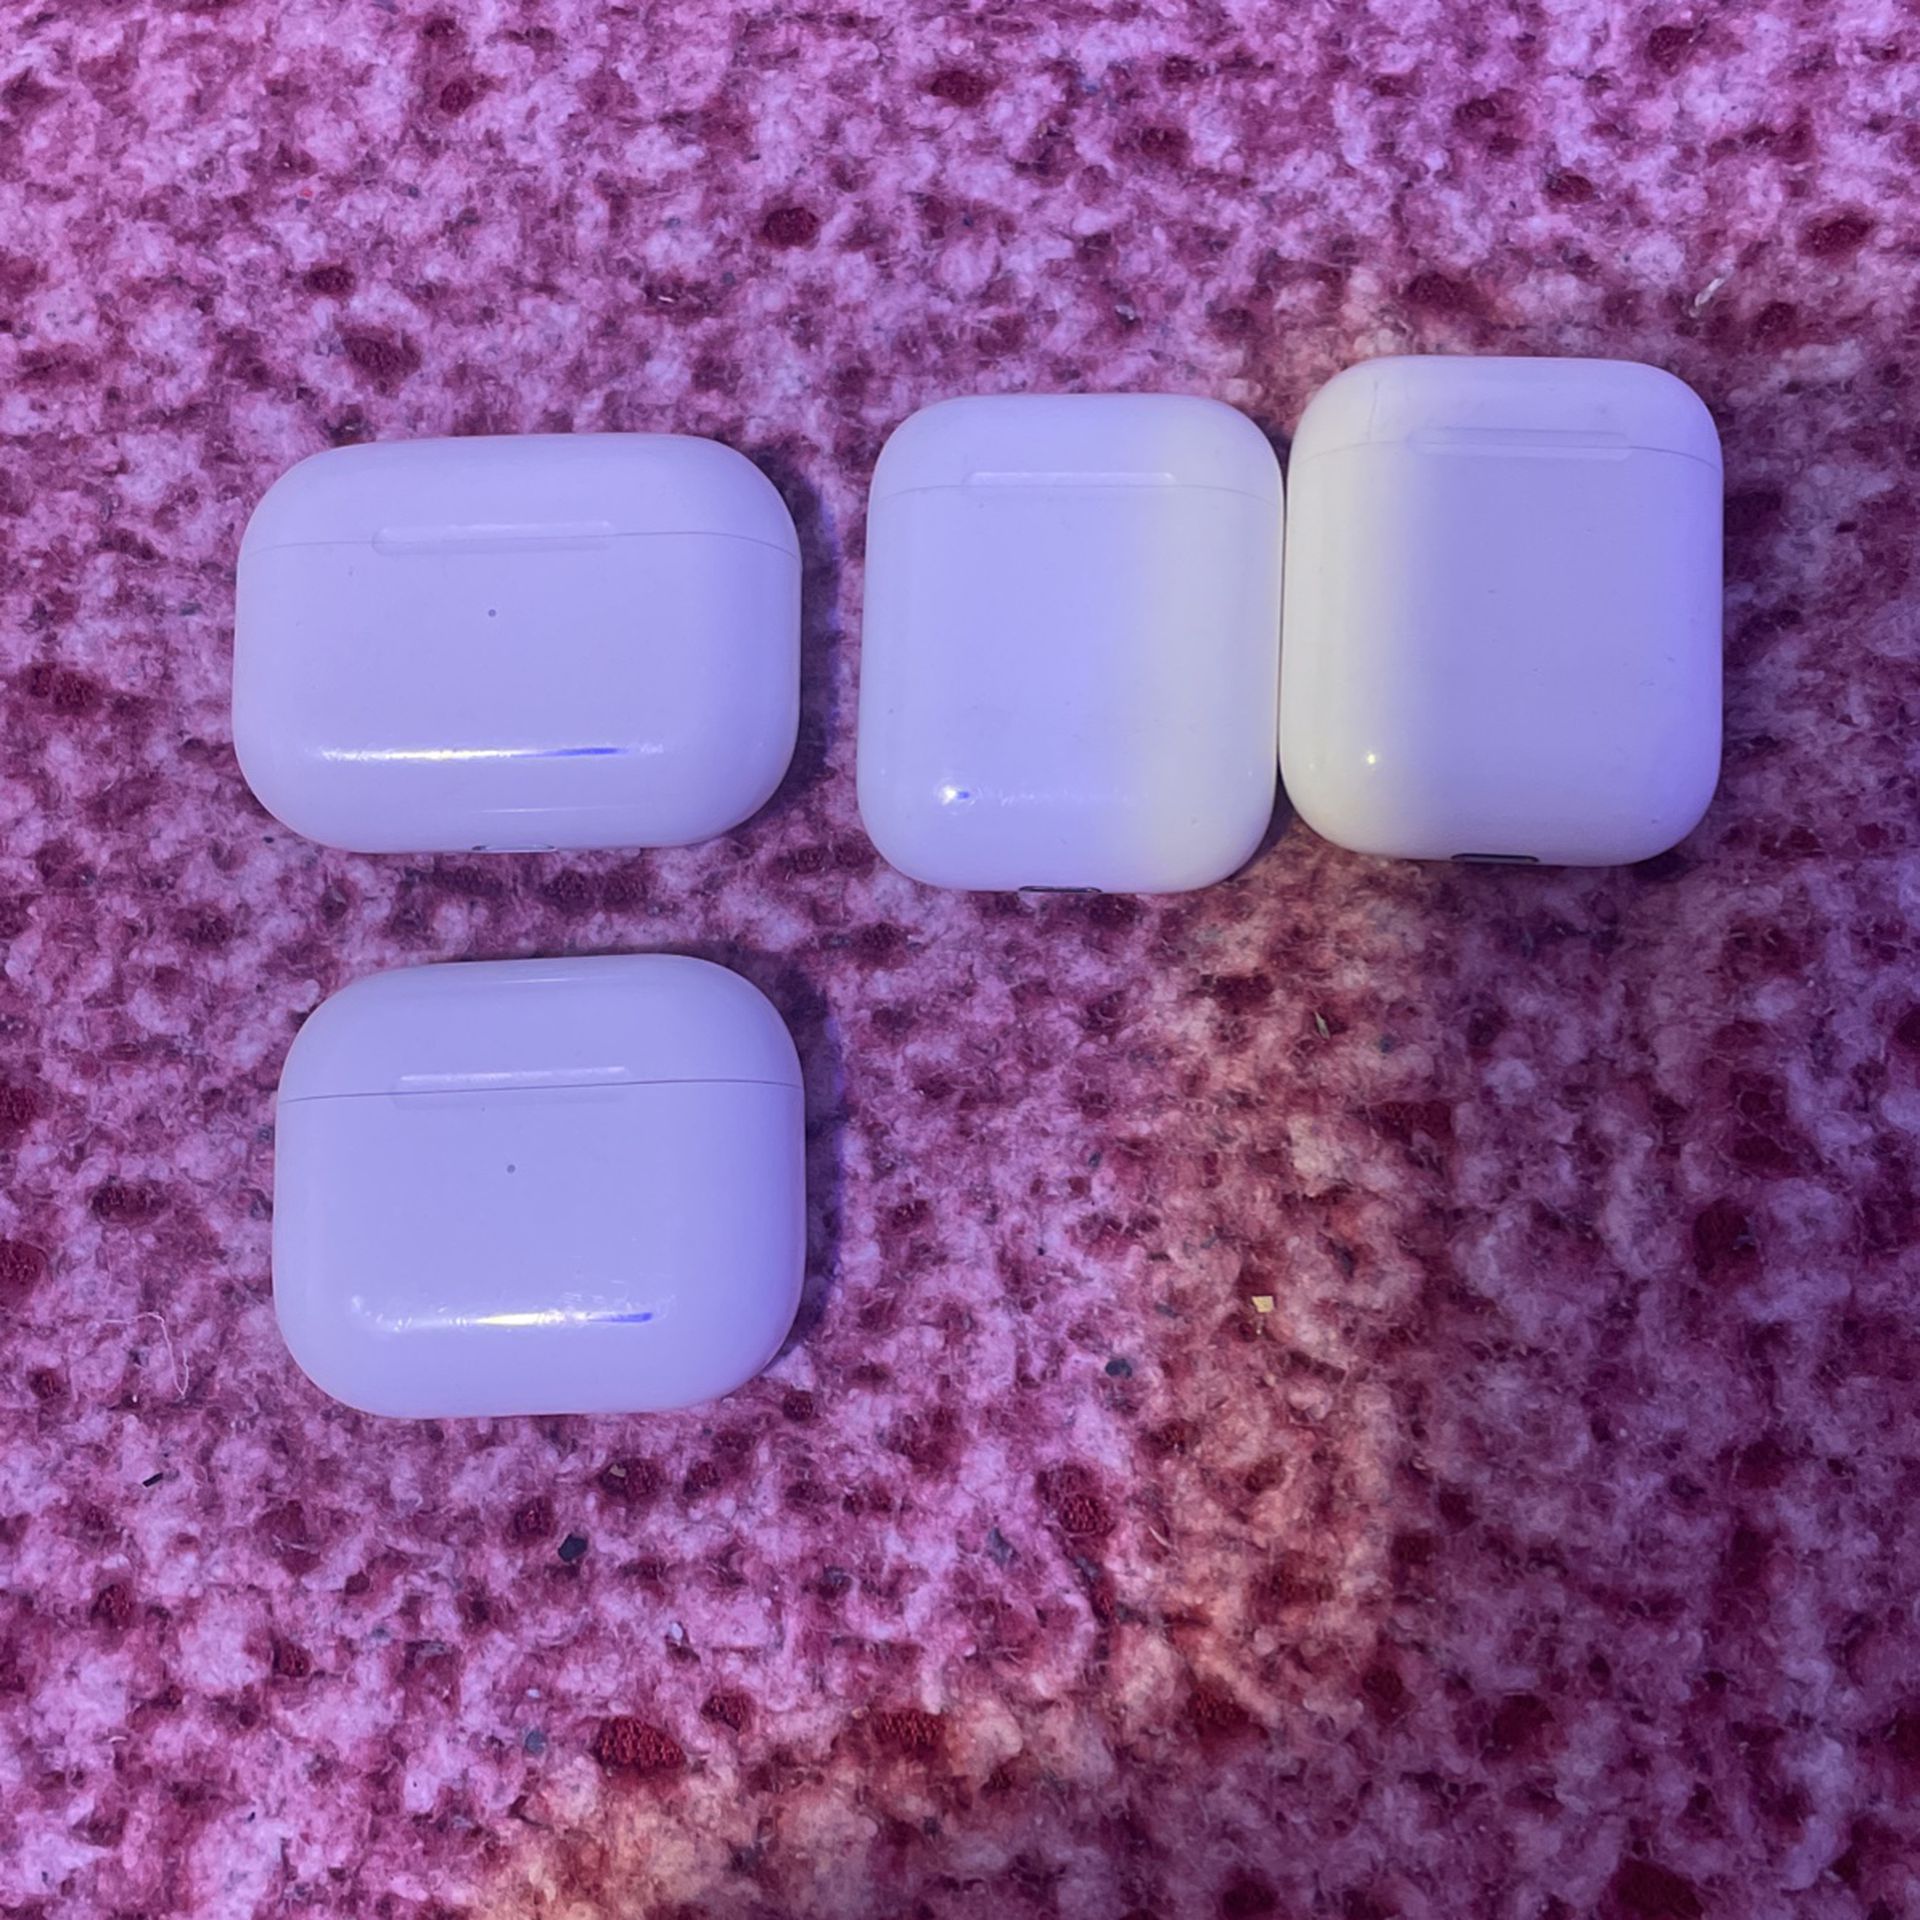 Selling All Gens Of Airpods